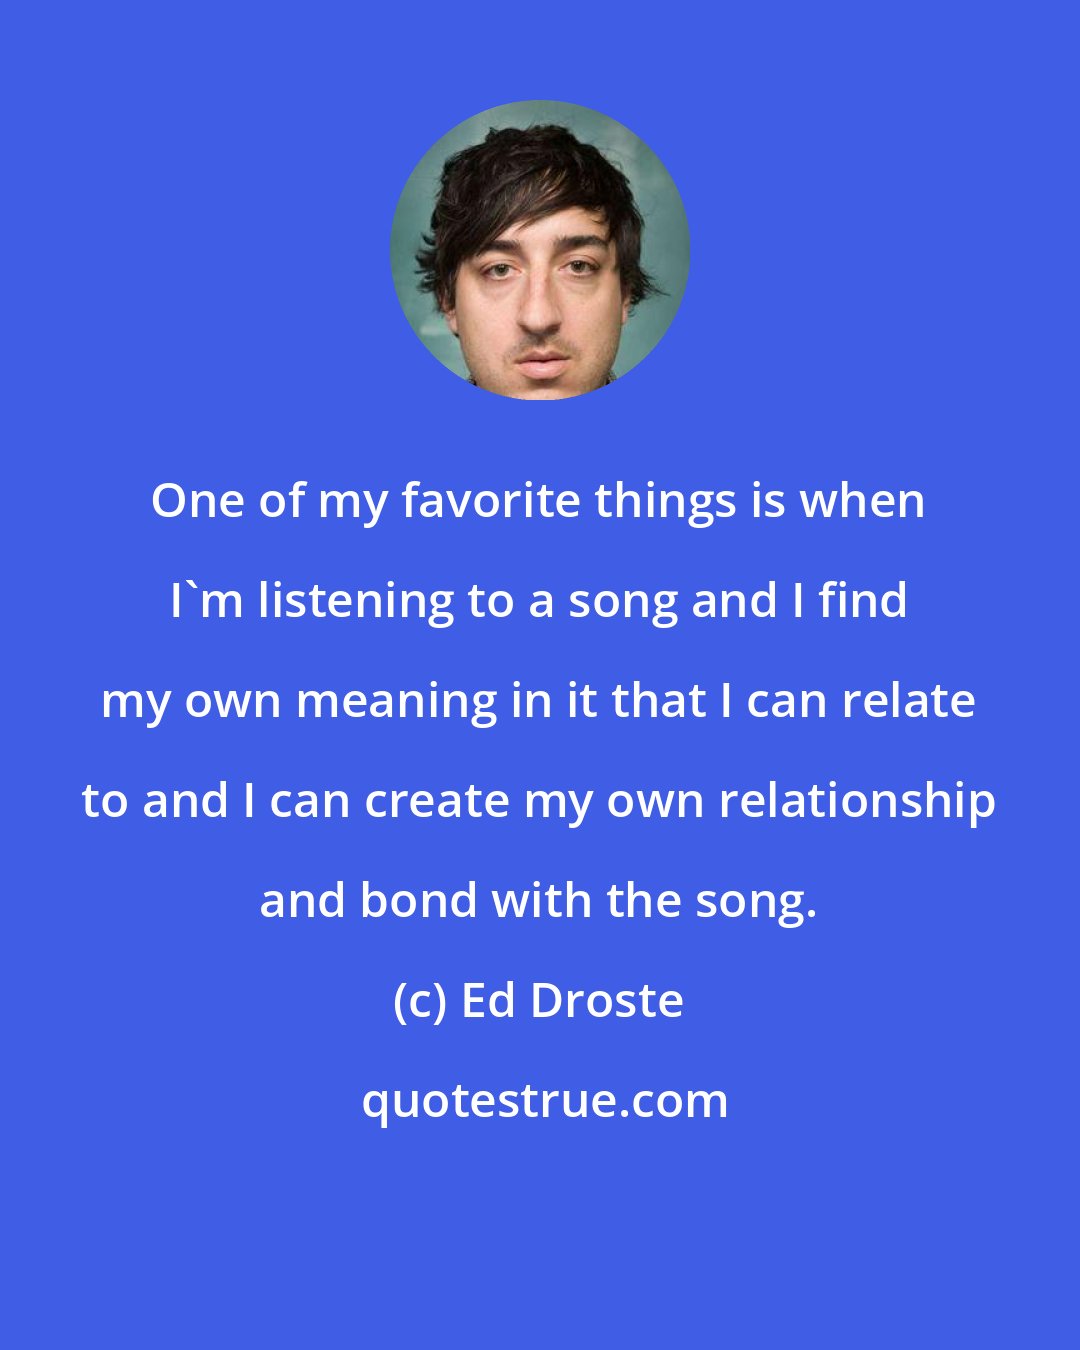 Ed Droste: One of my favorite things is when I'm listening to a song and I find my own meaning in it that I can relate to and I can create my own relationship and bond with the song.